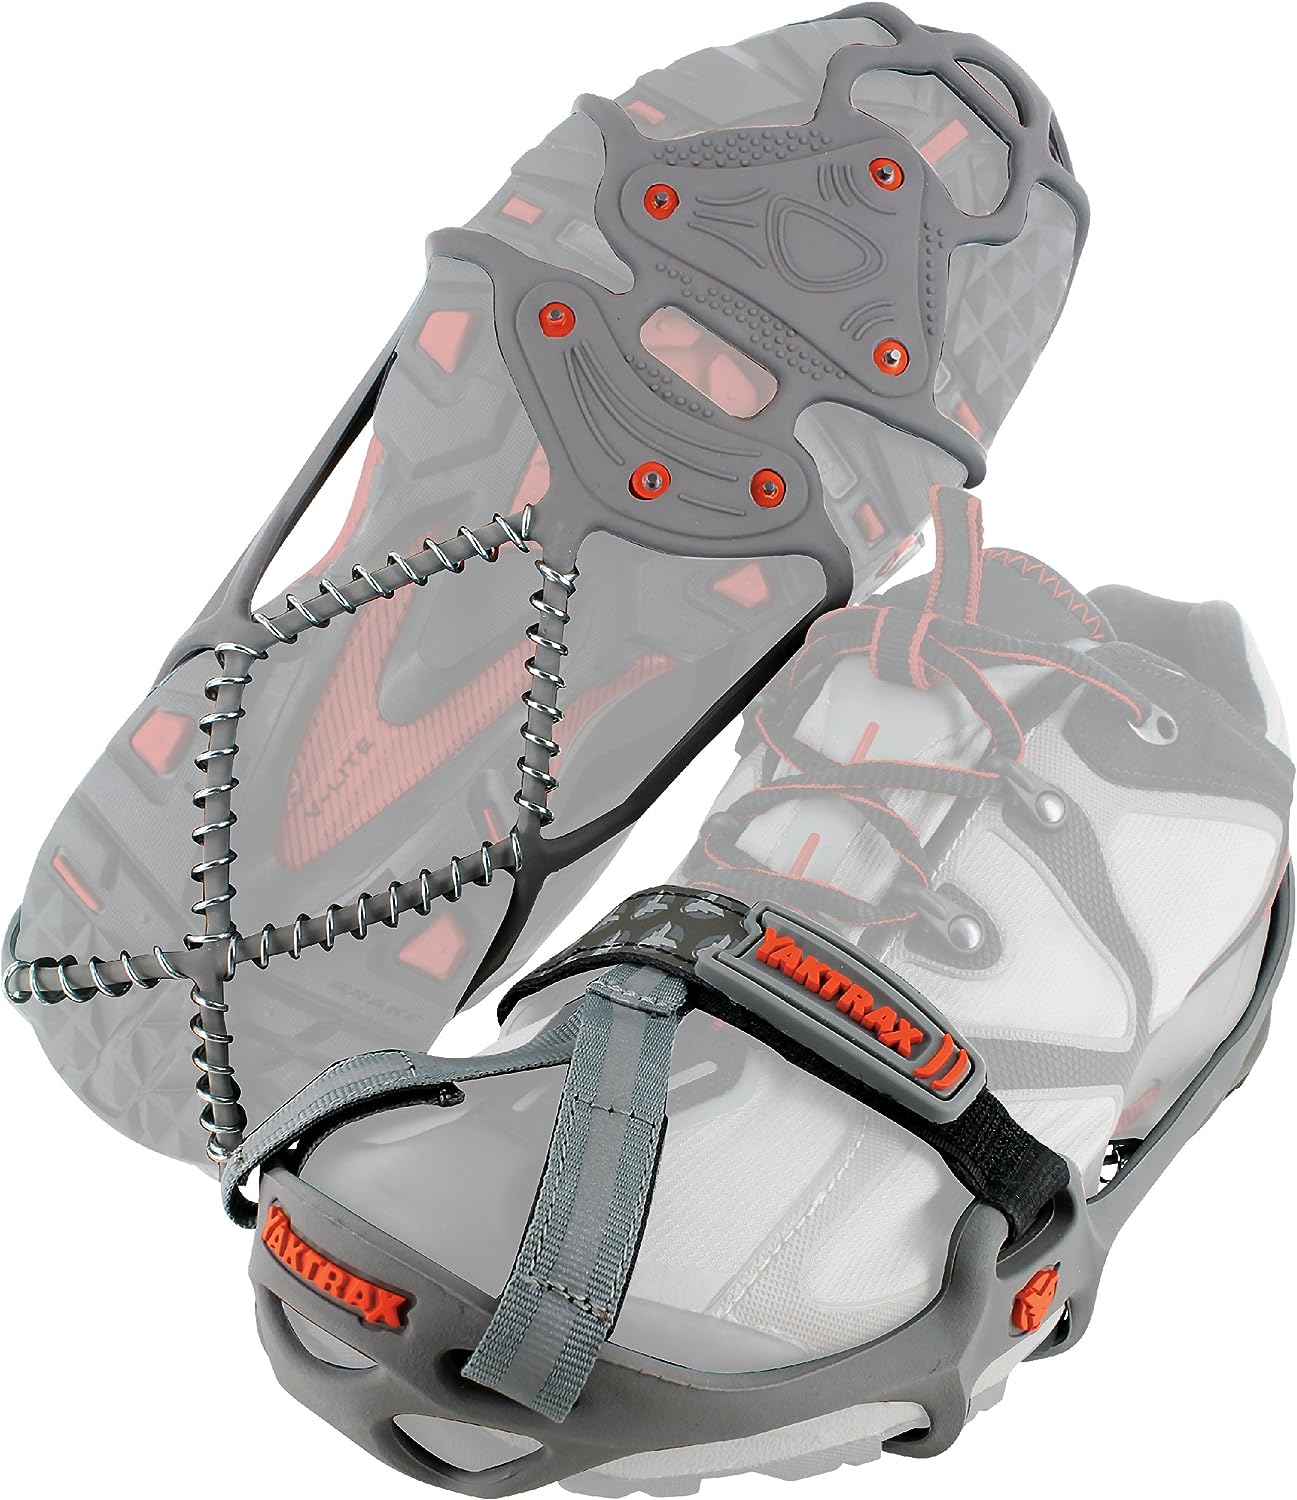 Yaktrax Run Traction Cleats for Running on Snow and [...]